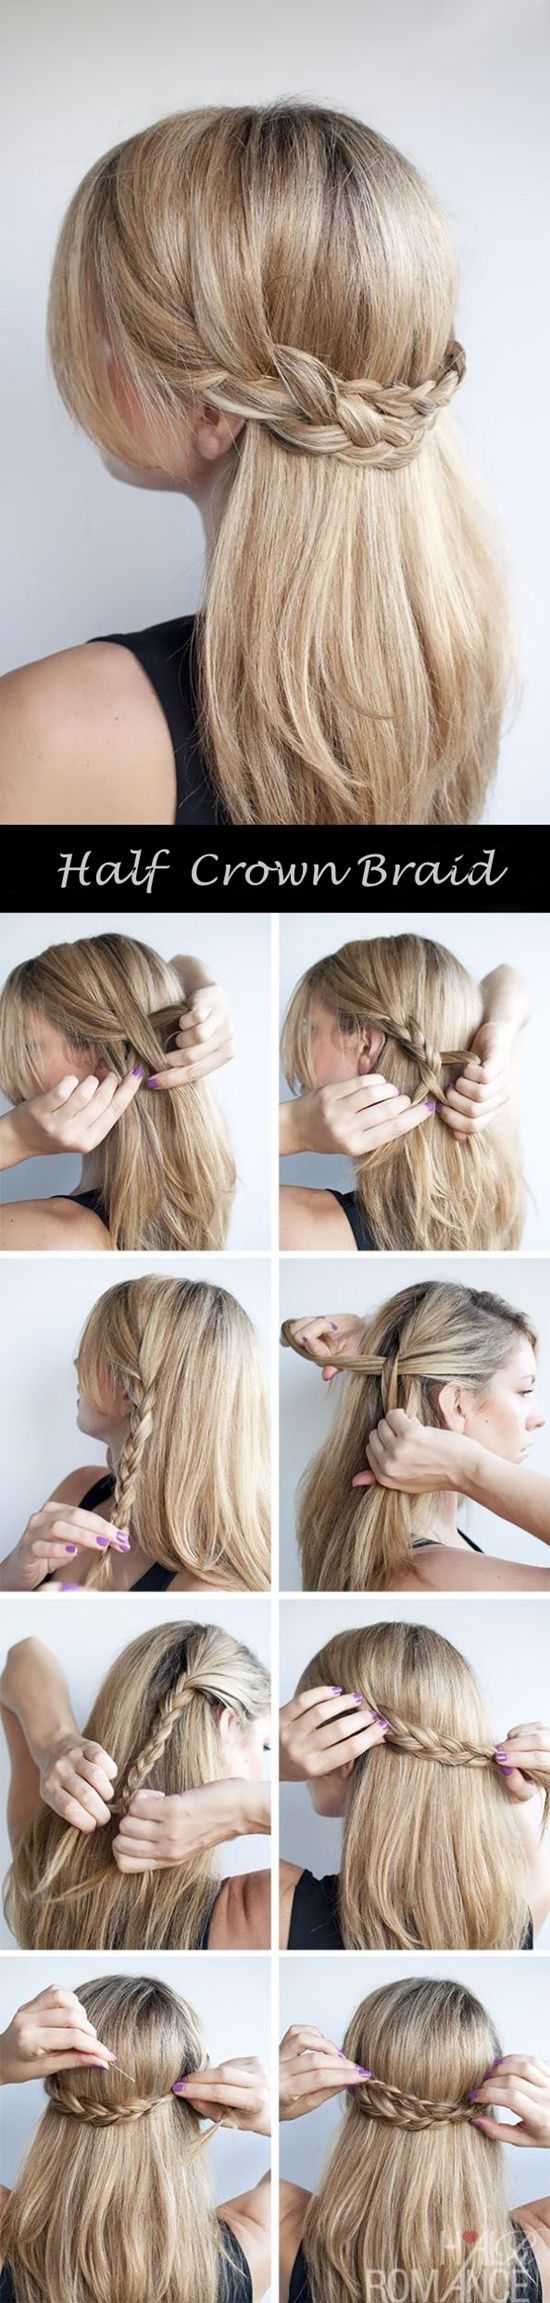 Half Crown braid tutorial. Step by step with clip in cheap blonde hair extension...